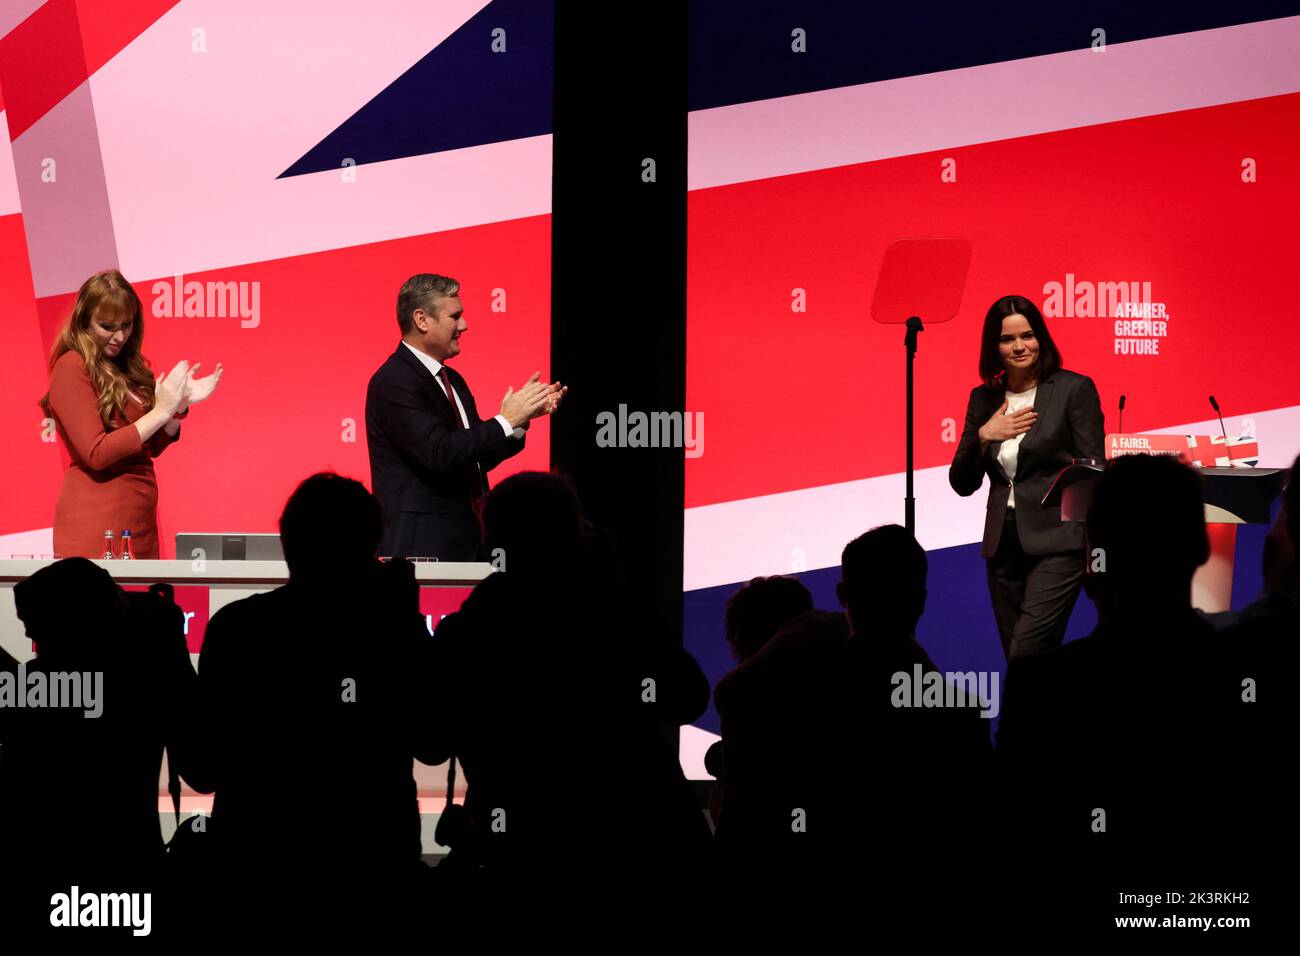 Belarus opposition leader Sviatlana Tsikhanouskaya is applauded by British Labour Party leader Keir Starmer and Deputy leader of the Labour Party Angela Rayner, after her speech, at Britain's Labour Party annual conference in Liverpool, Britain, September 28, 2022. REUTERS/Phil Noble Stock Photo